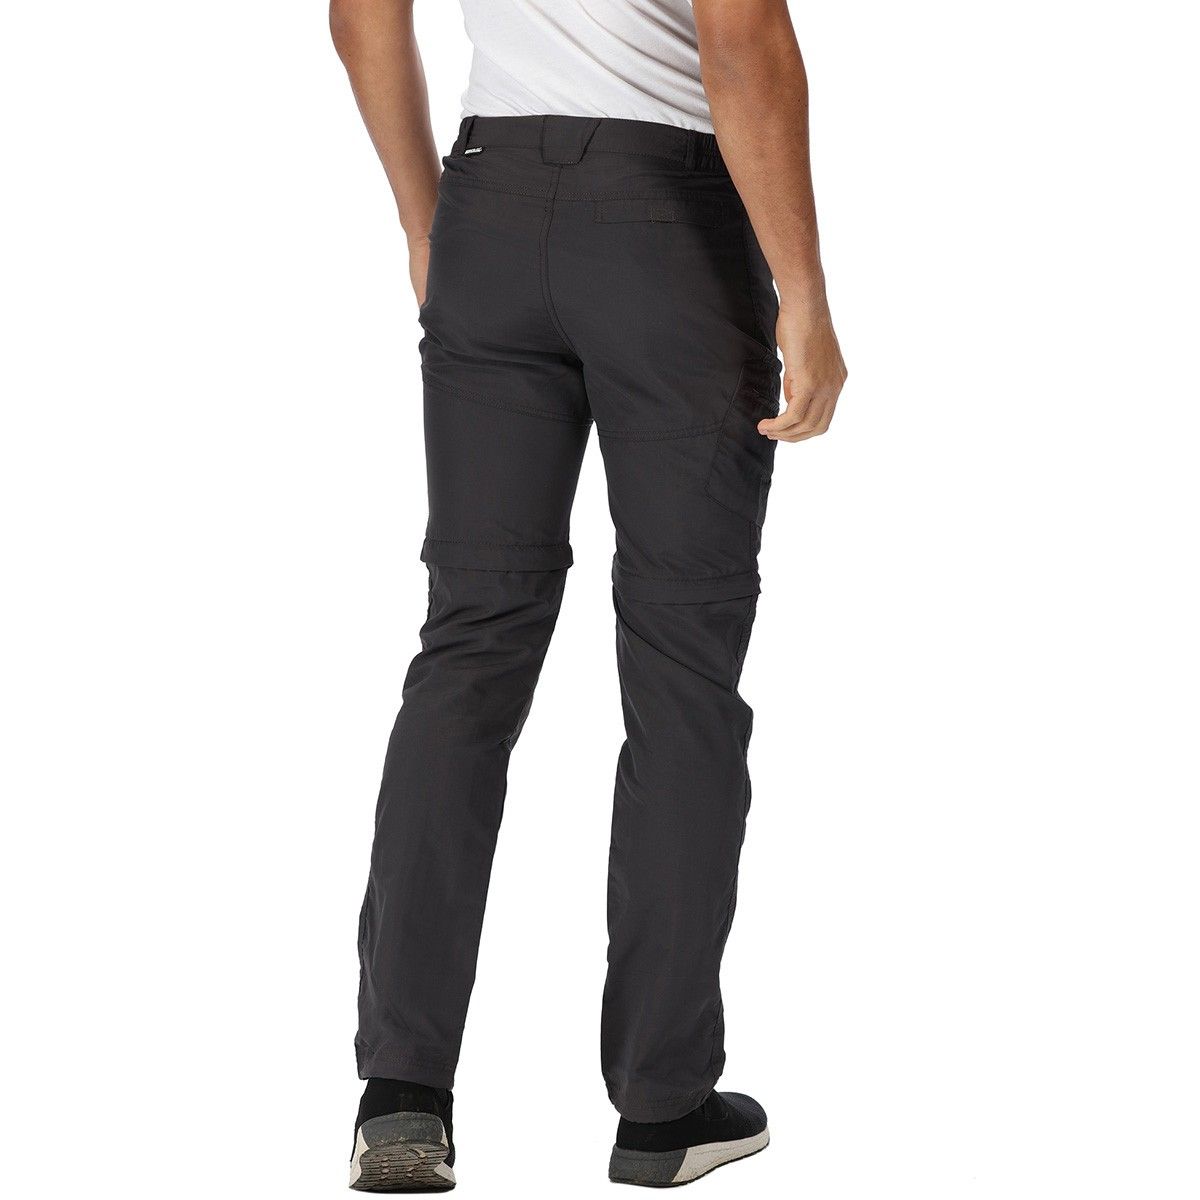 Quick-drying and showerproof. Part-elasticated waist improves mobility and comfort. Drawcord at the hem. Multiple pockets. 2-in-1 zip-off design. 100% Polyamide. Leg length: S - 29ins, R - 31ins, L - 33ins. Regatta Mens sizing (waist approx): 26in/66cm, 28in/71cm, 30in/76cm, 32in/81cm, 33in/84cm, 34in/86.5cm, 36in/91.5cm, 38in/96.5cm, 40in/101.5cm, 42in/106.5cm, 44in/111.5cm, 46in/117cm, 48in/122cm, 50in/127cm.